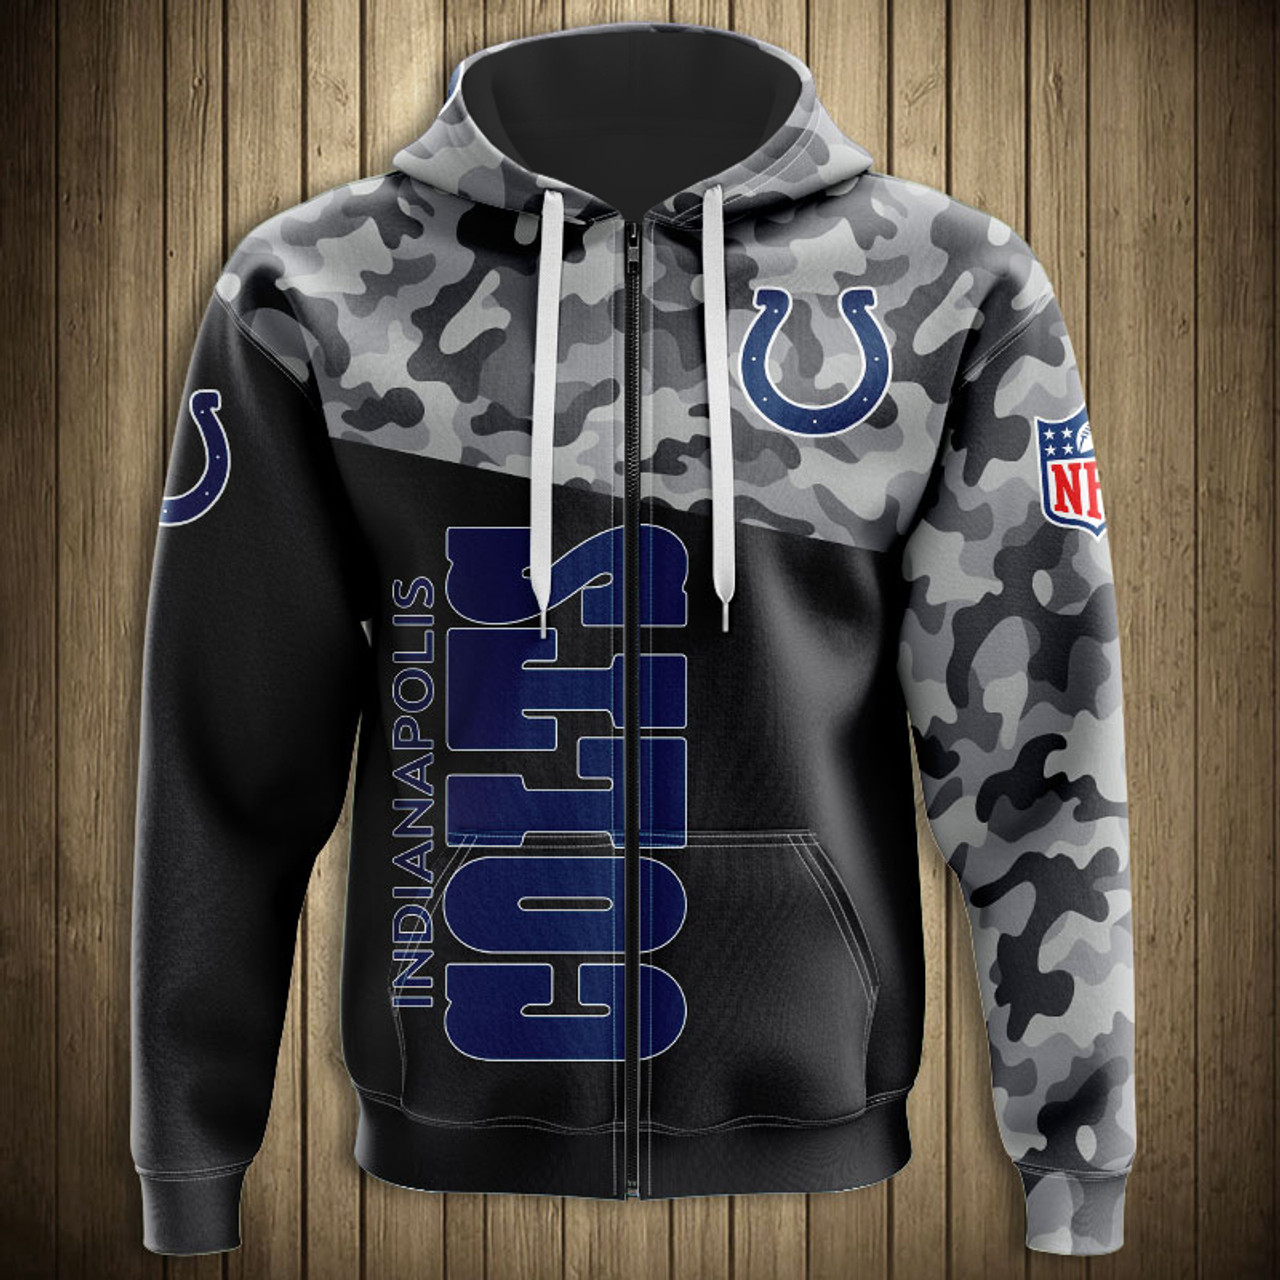 indianapolis colts zip up hoodie